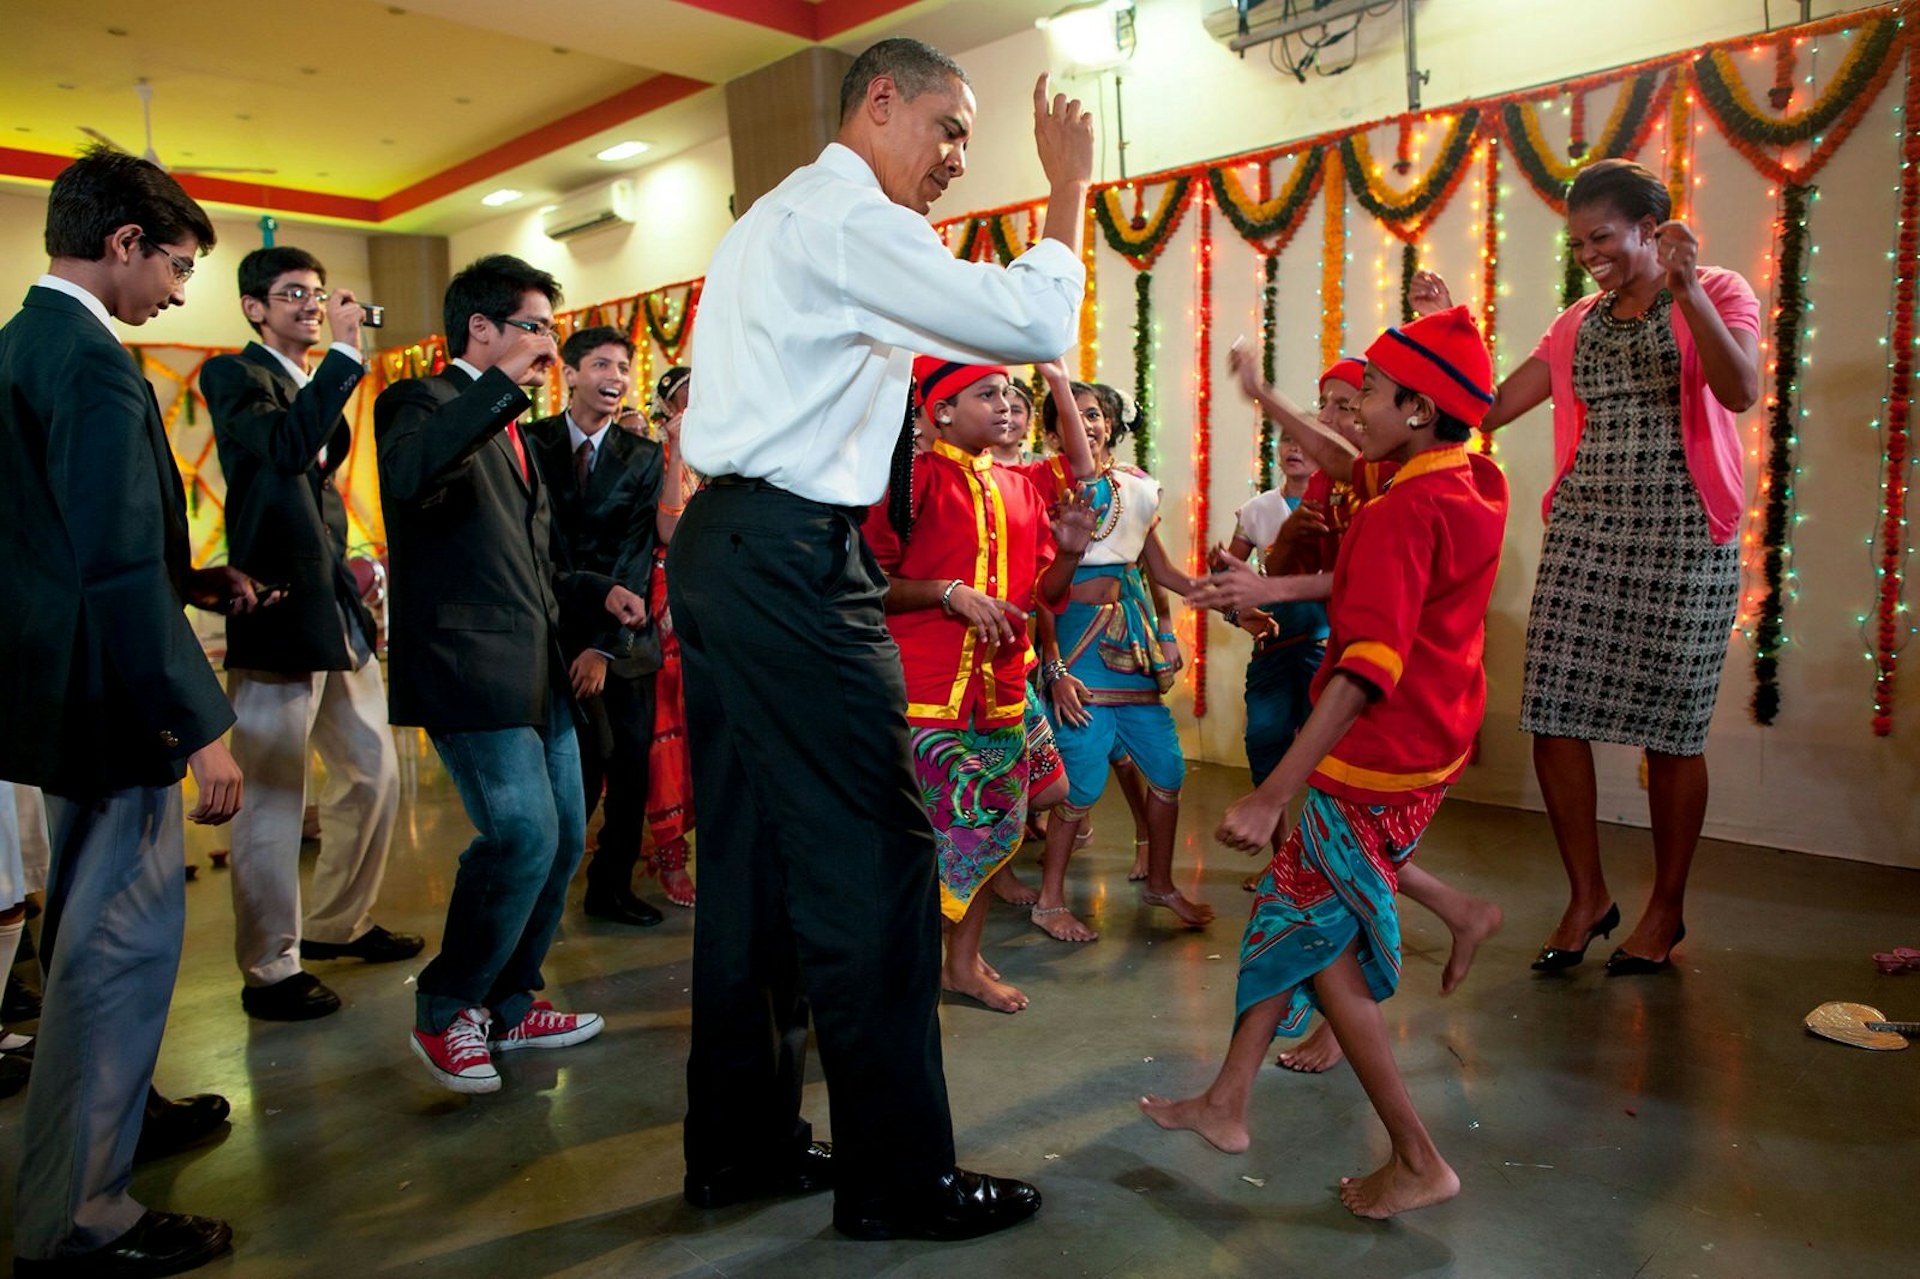 The president dancing with school children and the First Lady in Mumbai, India, Nov 7, 2010 © Pete Souza / Official White House Photo